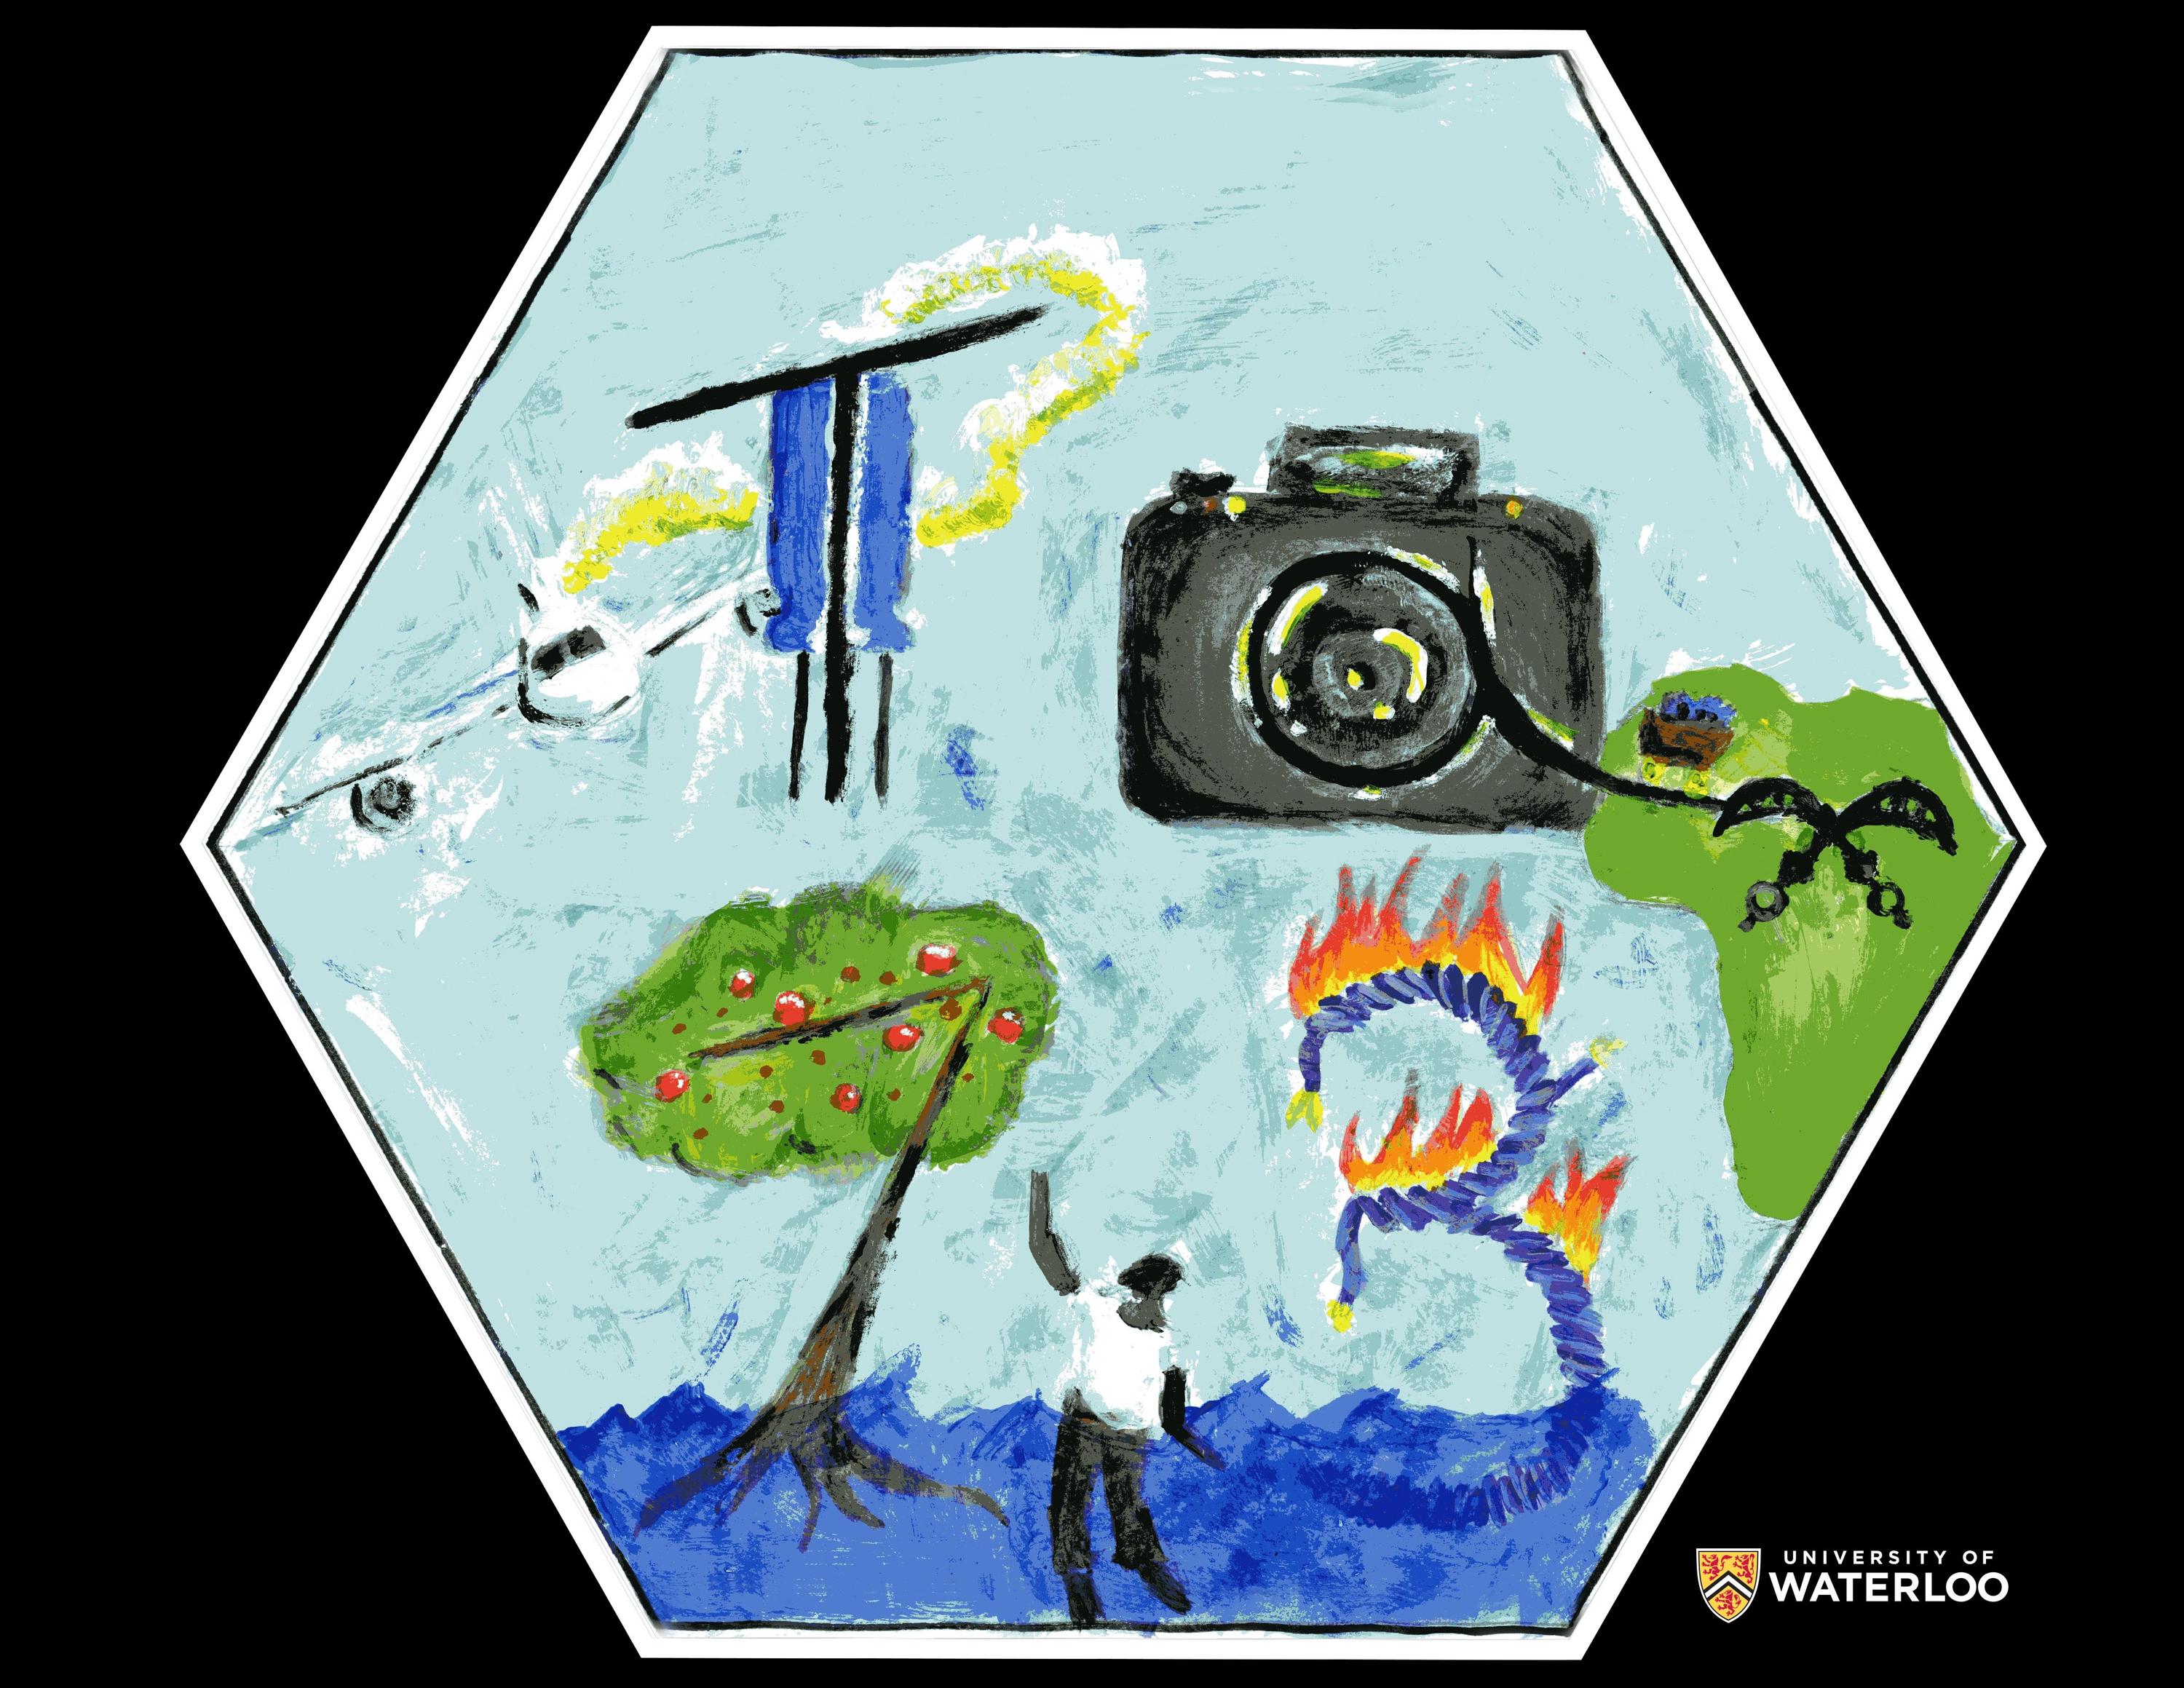 Acrylic on sky blue background. The chemical symbol “Ta” and atomic number “73” appear as part of some of the images used in the tile. Among the images includes a plane, a capacity, a camera, an apple tree with a human figure pointing to it, wire covered in fire, and the continent of Africa with two swords in the middle.